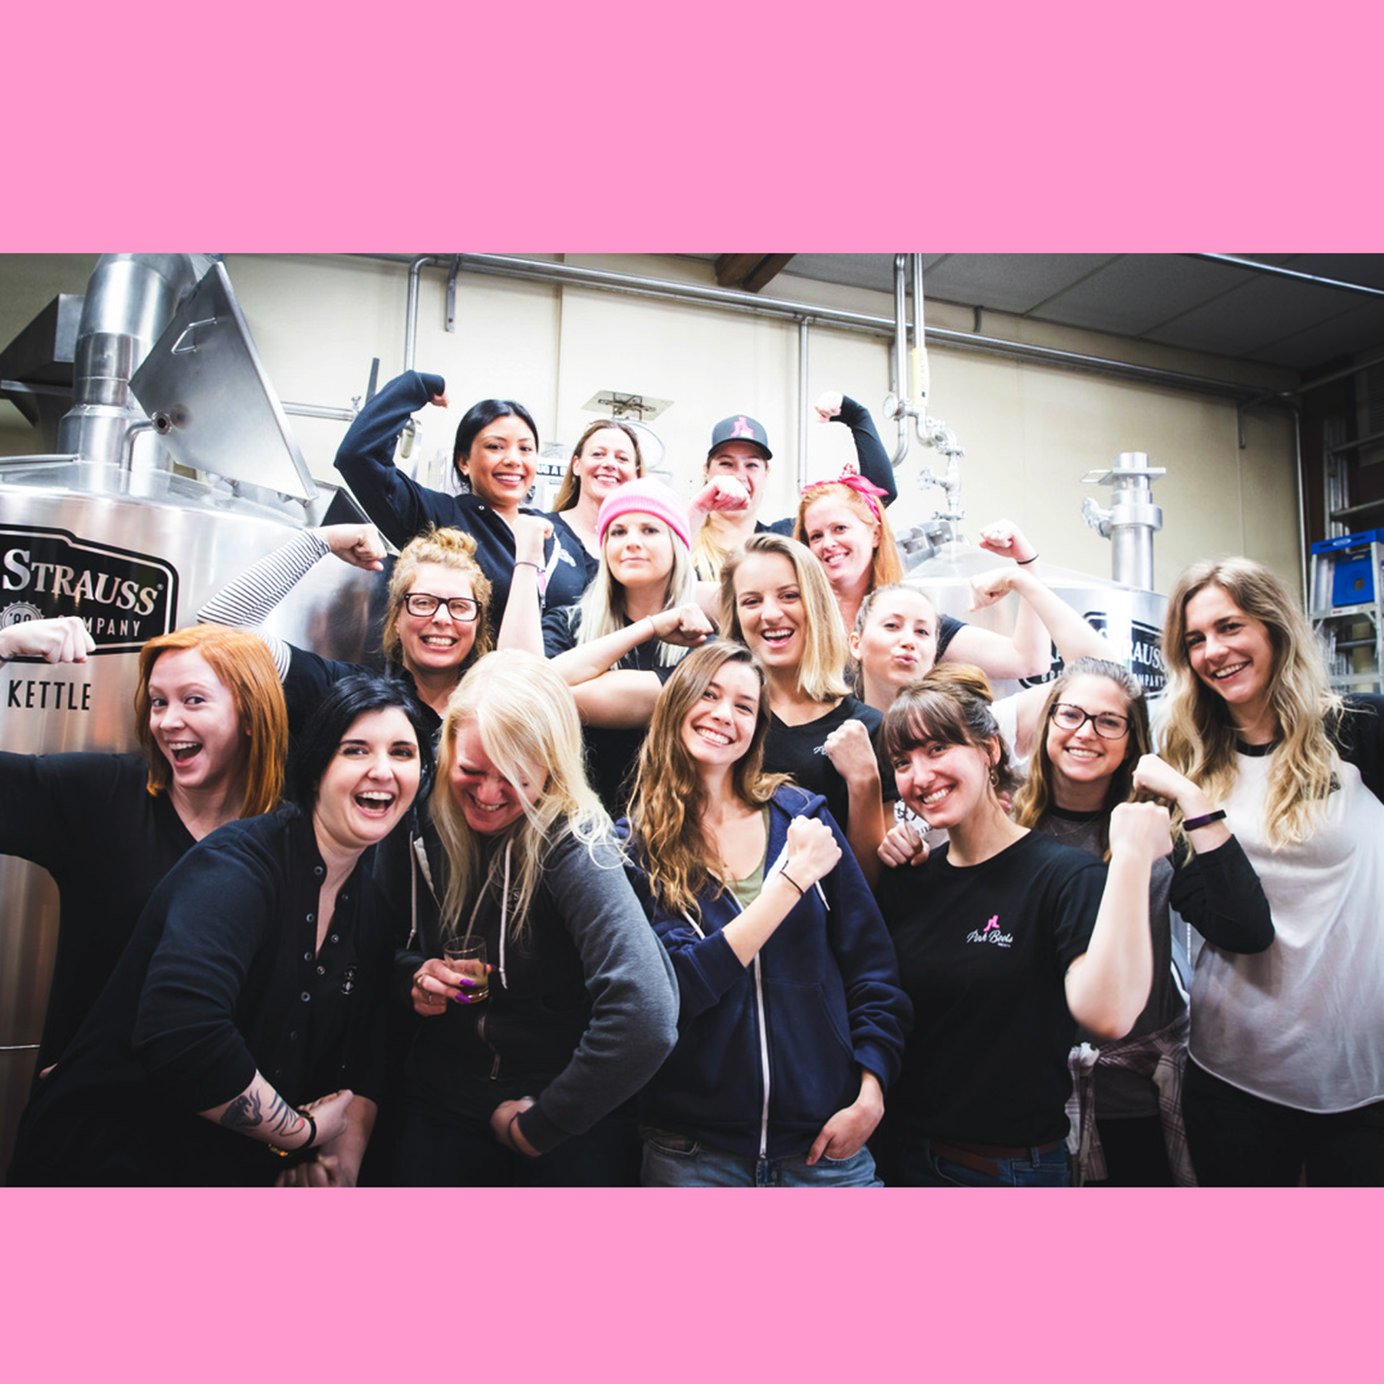 The Pink Boots Society Connects and Empowers All Women in Beer